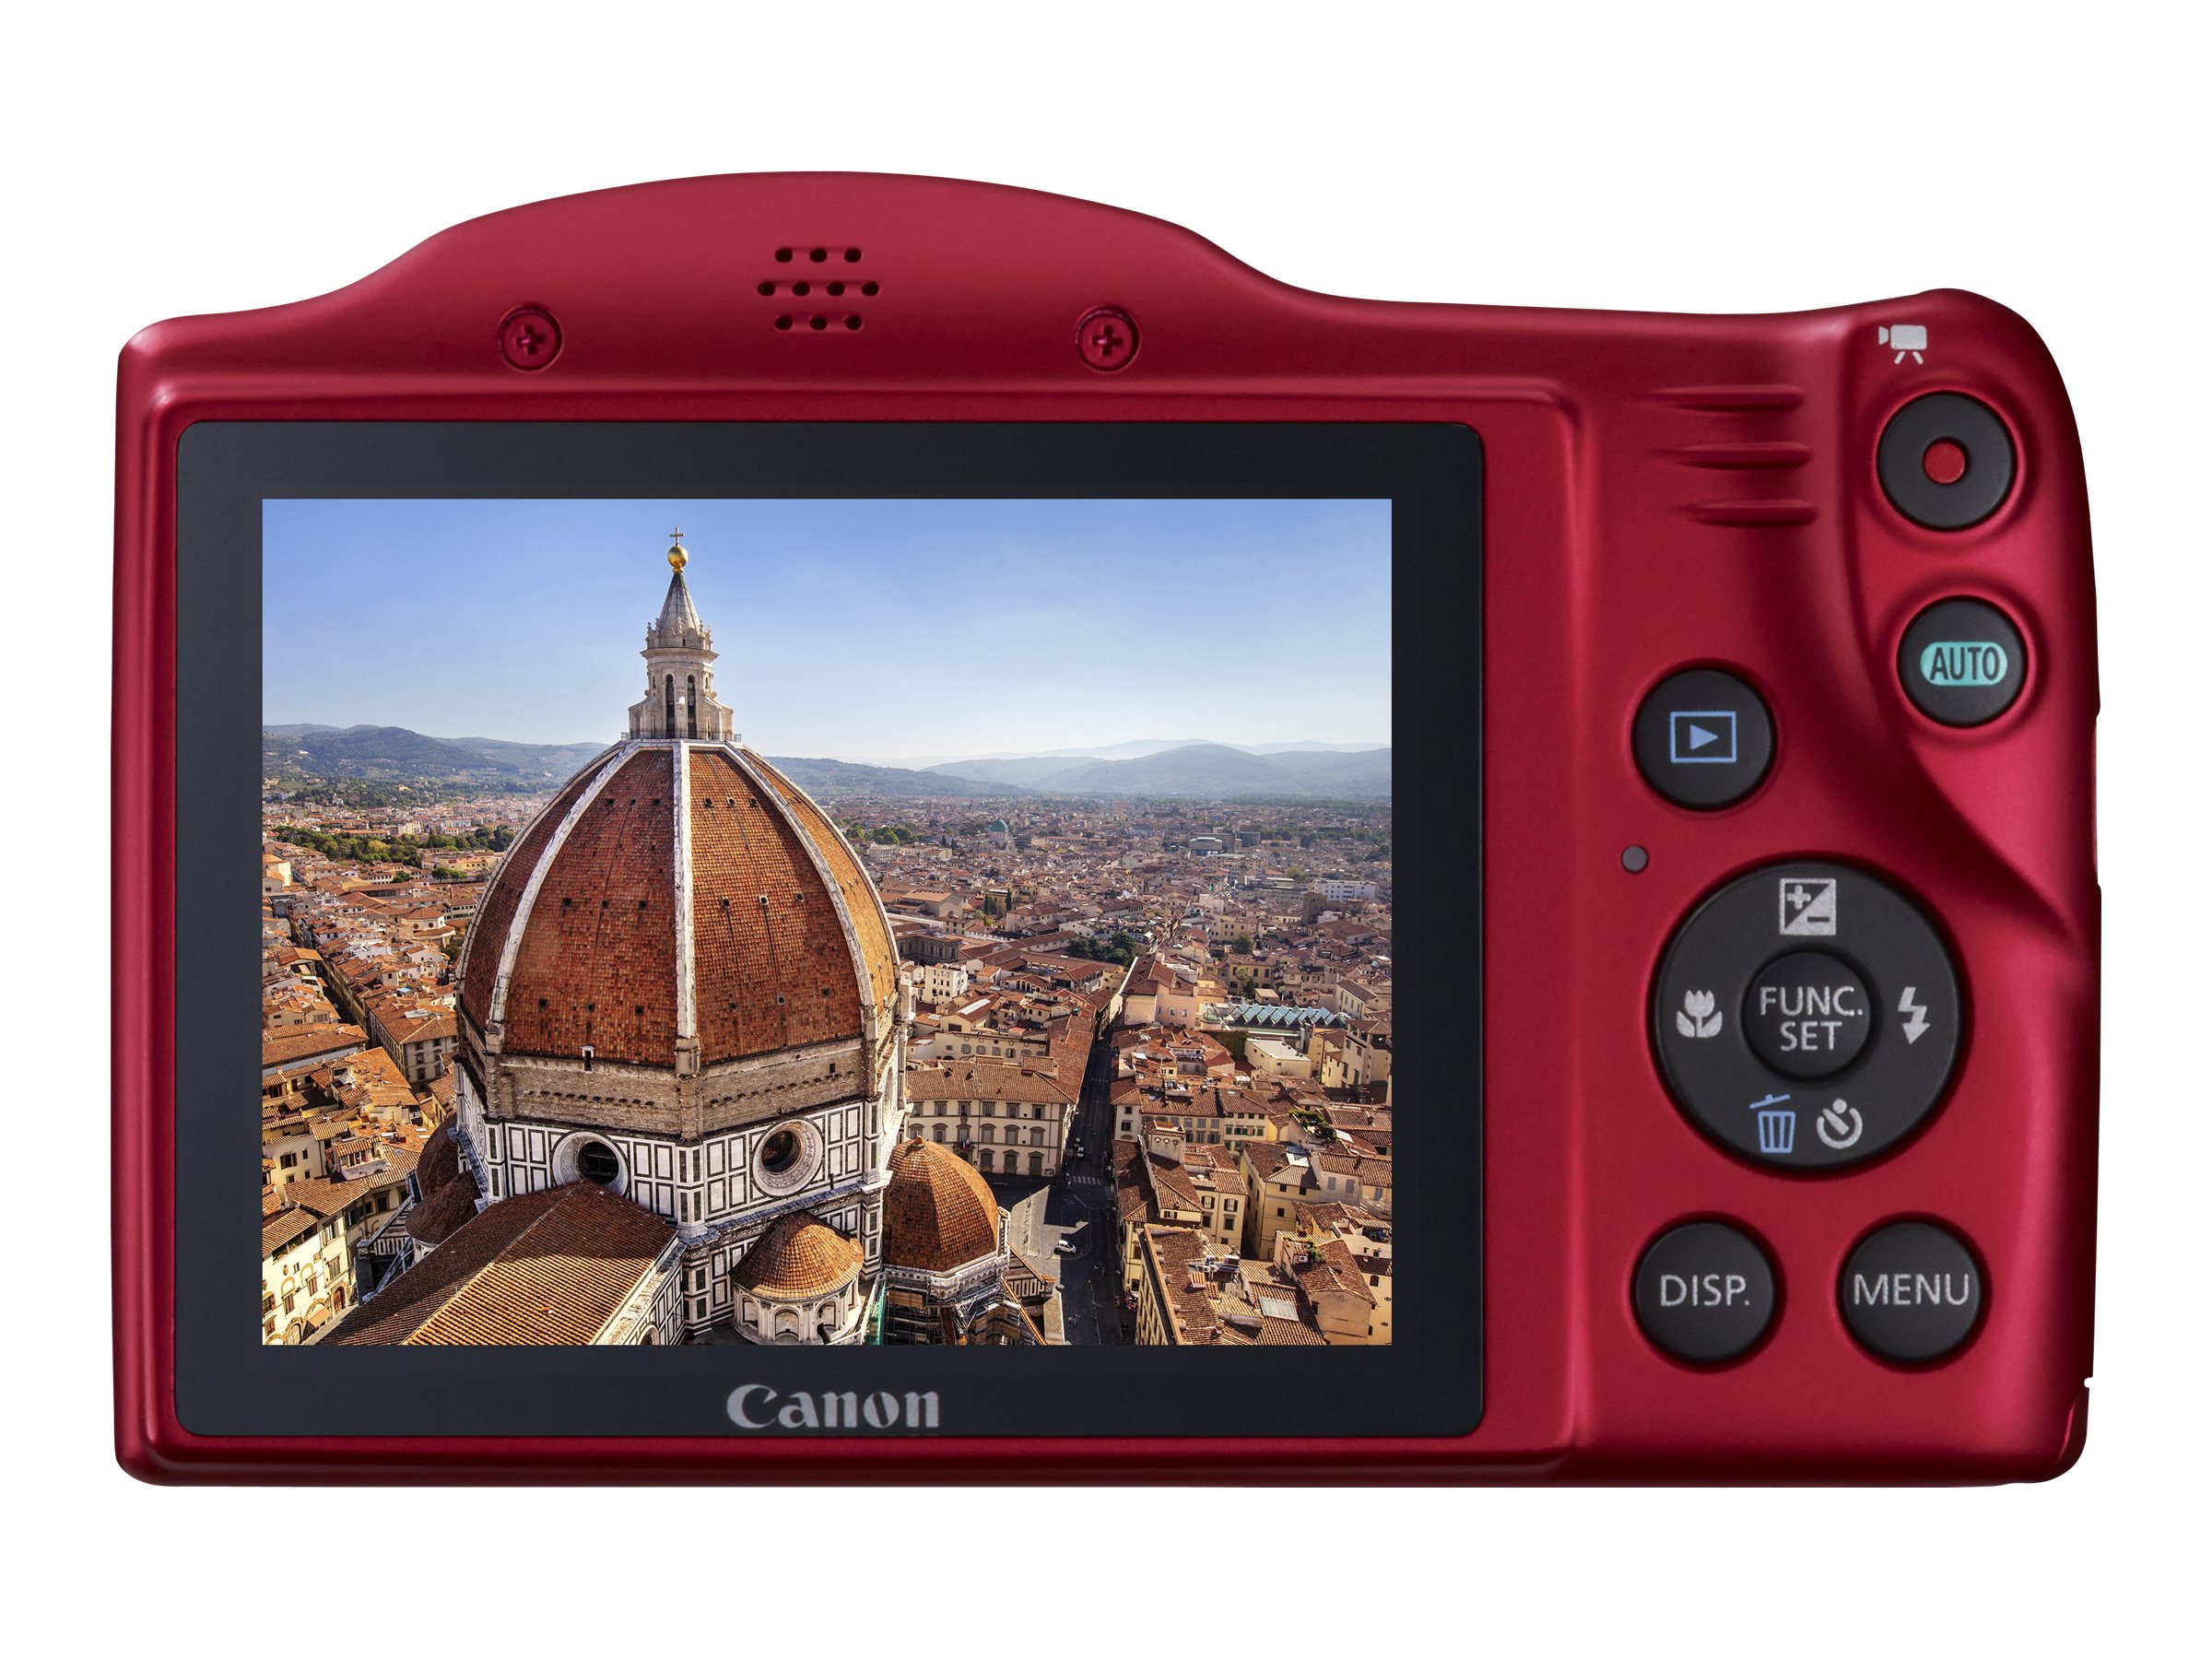 Canon PowerShot SX400 IS - Digital camera - High Definition - compact - 16.0 MP - 30 x optical zoom - red - image 49 of 72